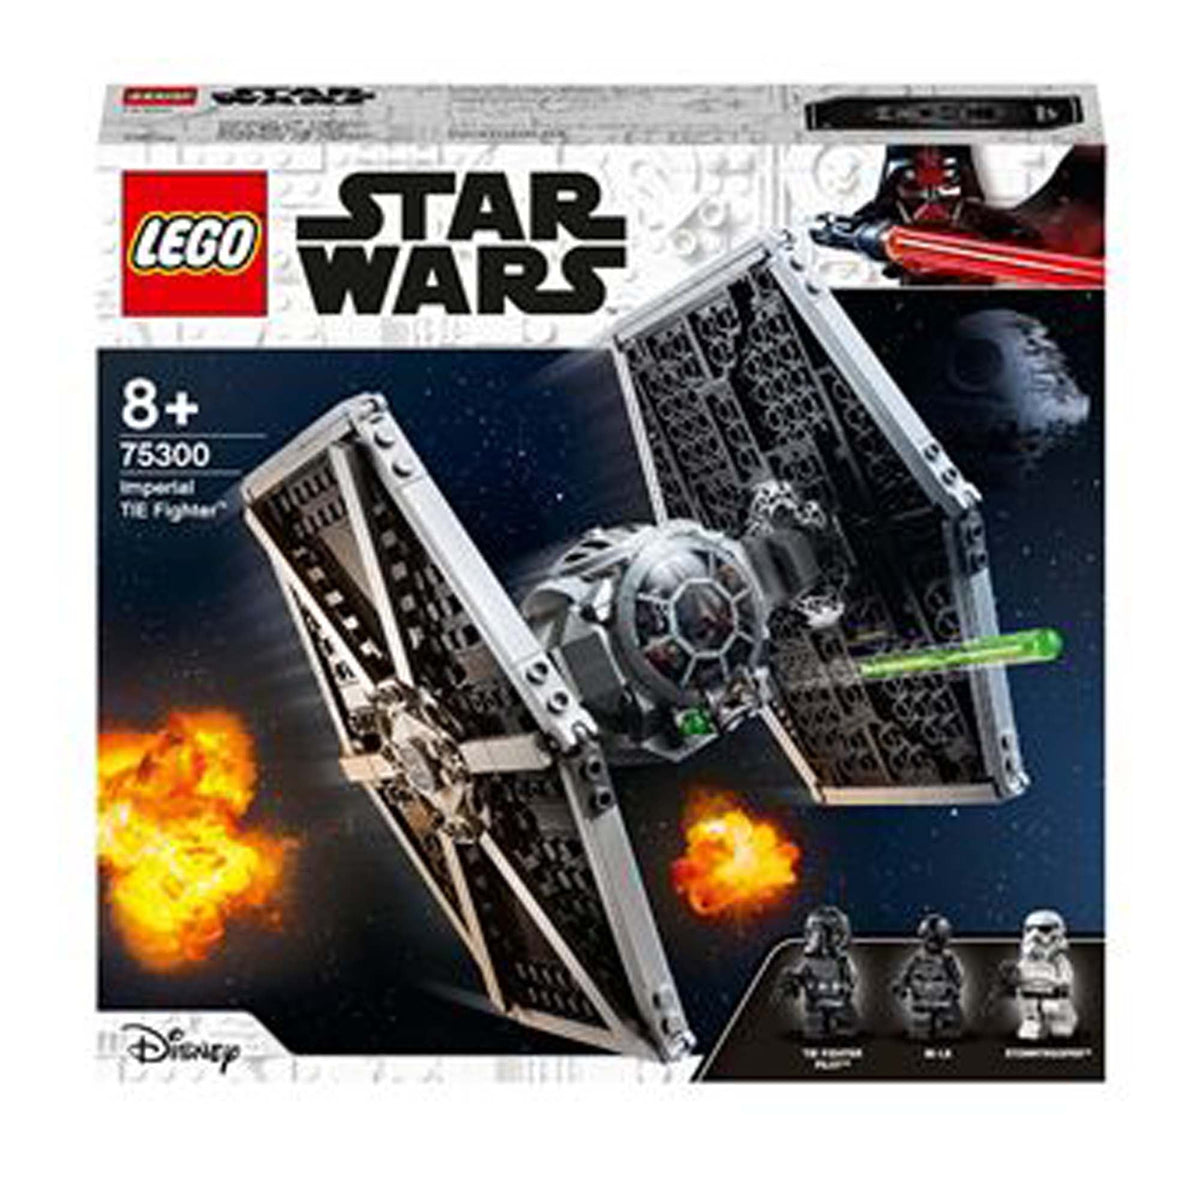 LEGO Toys & Games LEGO Star Wars Imperial TIE Fighter, 75300, Ages 8+, 432 Pieces 673419340137